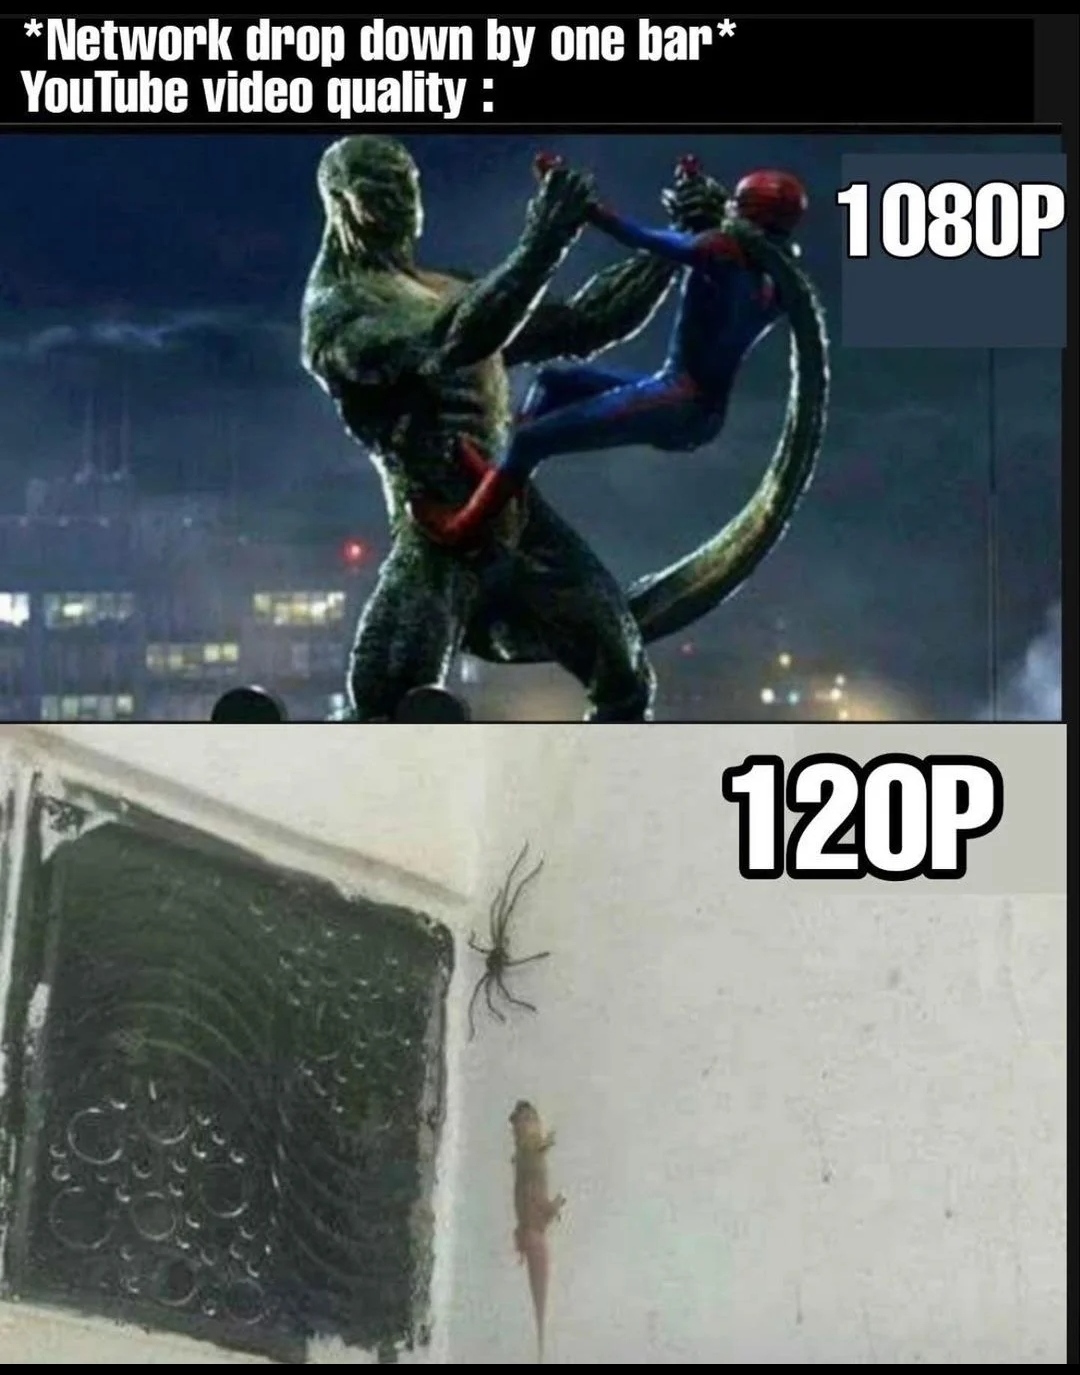 dank memes - funny memes - amazing spider man vs lizard - Network drop down by one bar YouTube video quality 1080P 120P